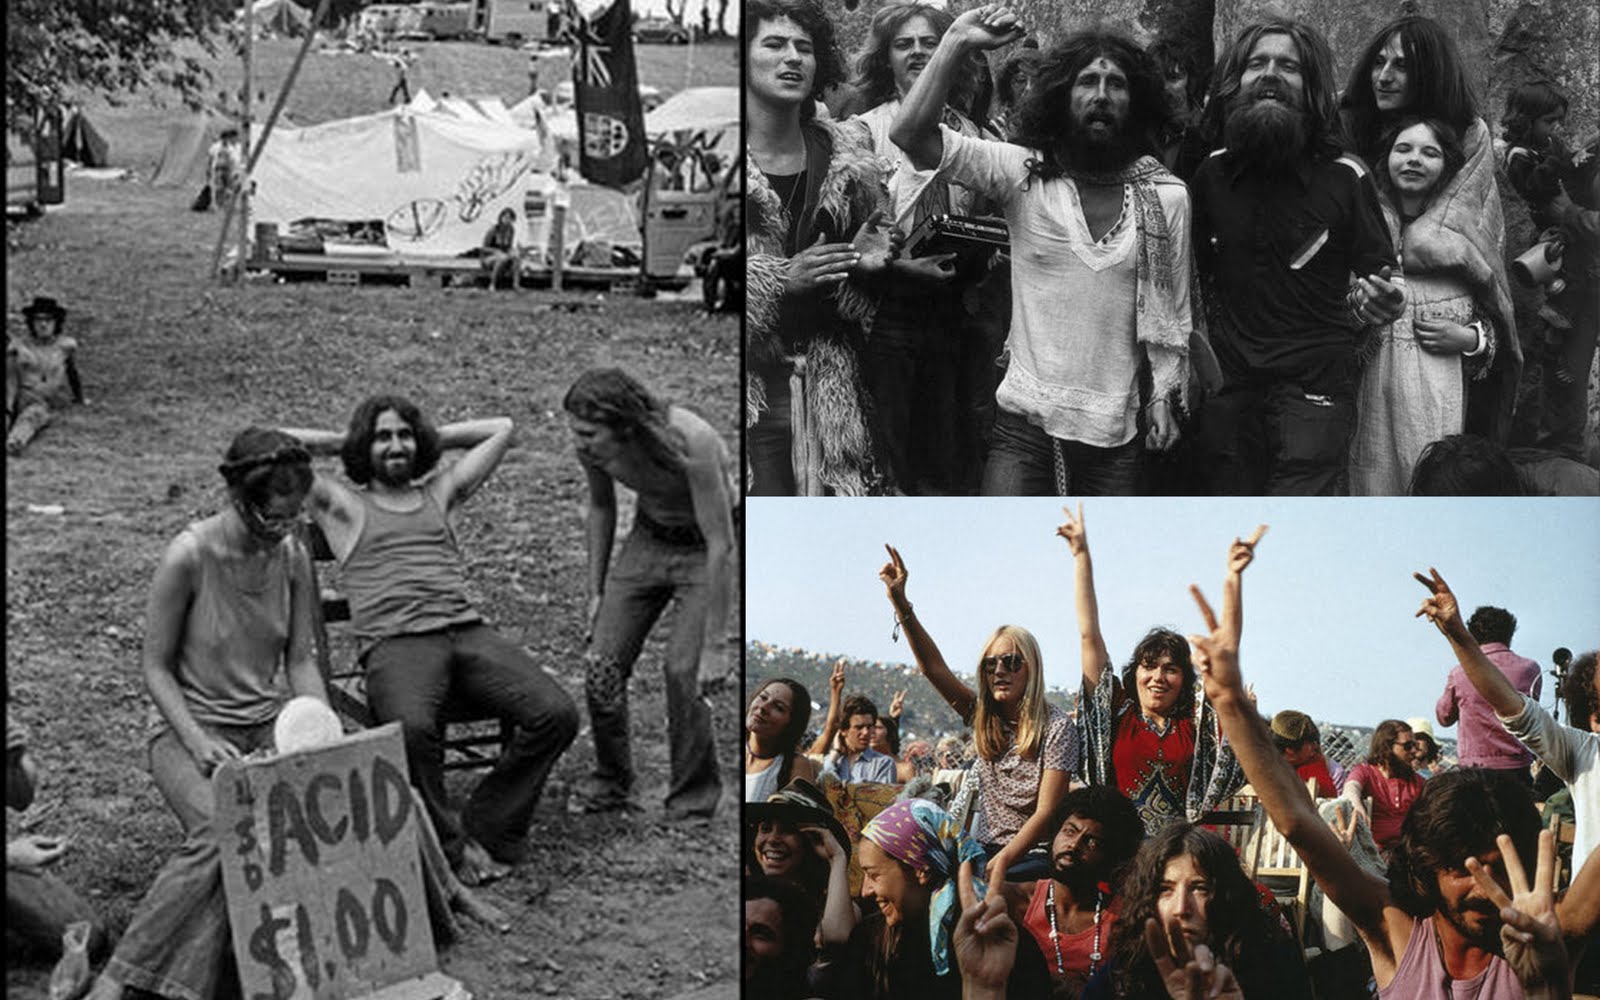 THE HIPPIES.